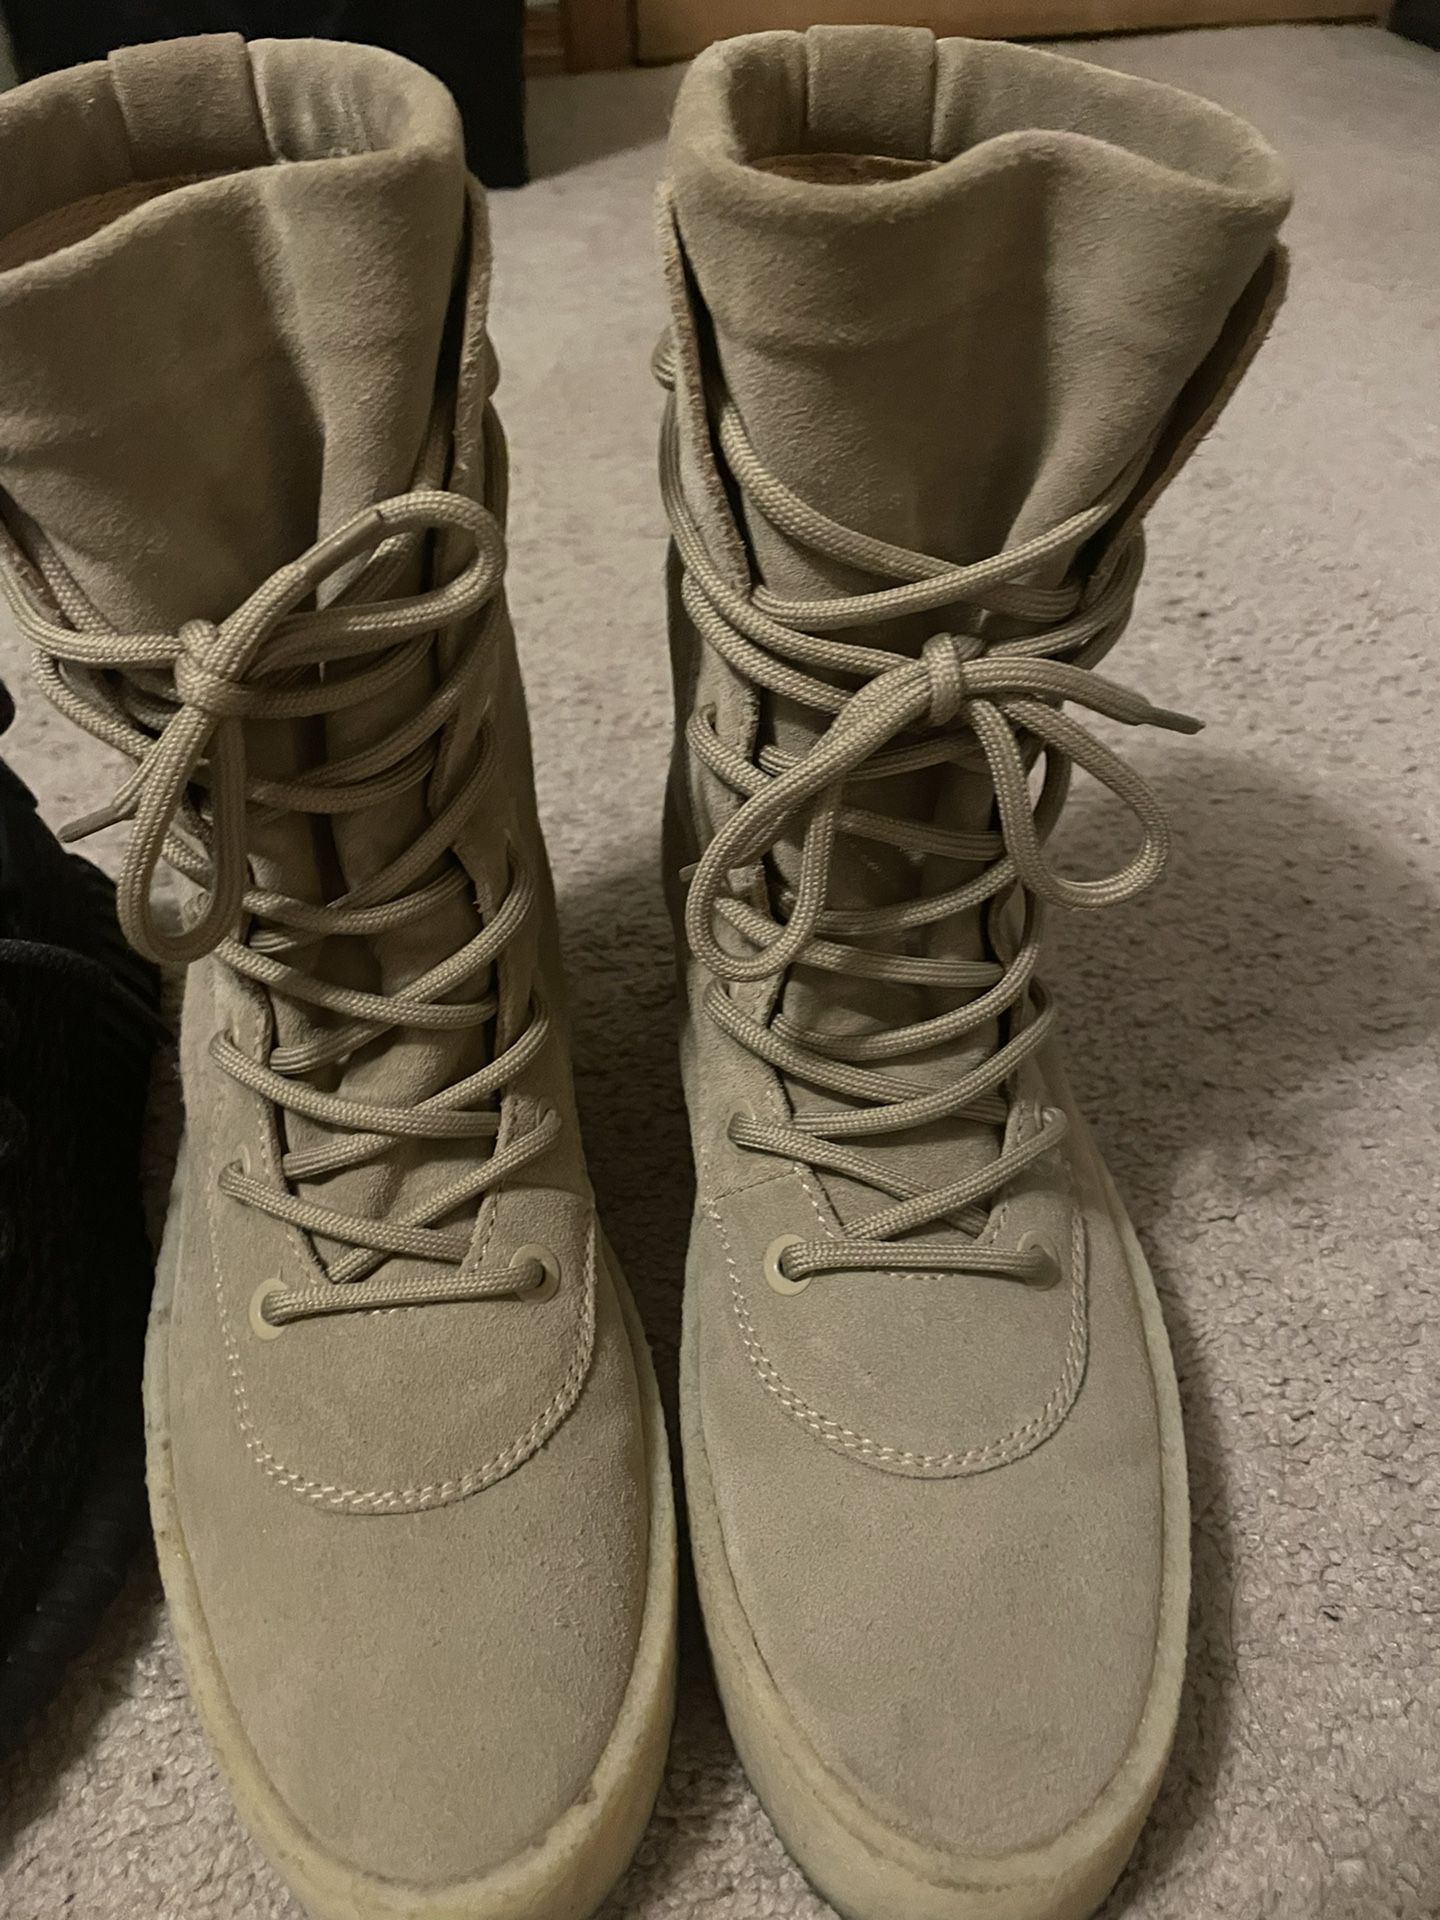 TESTING WATERS - Yeezy Jordans Common Projects